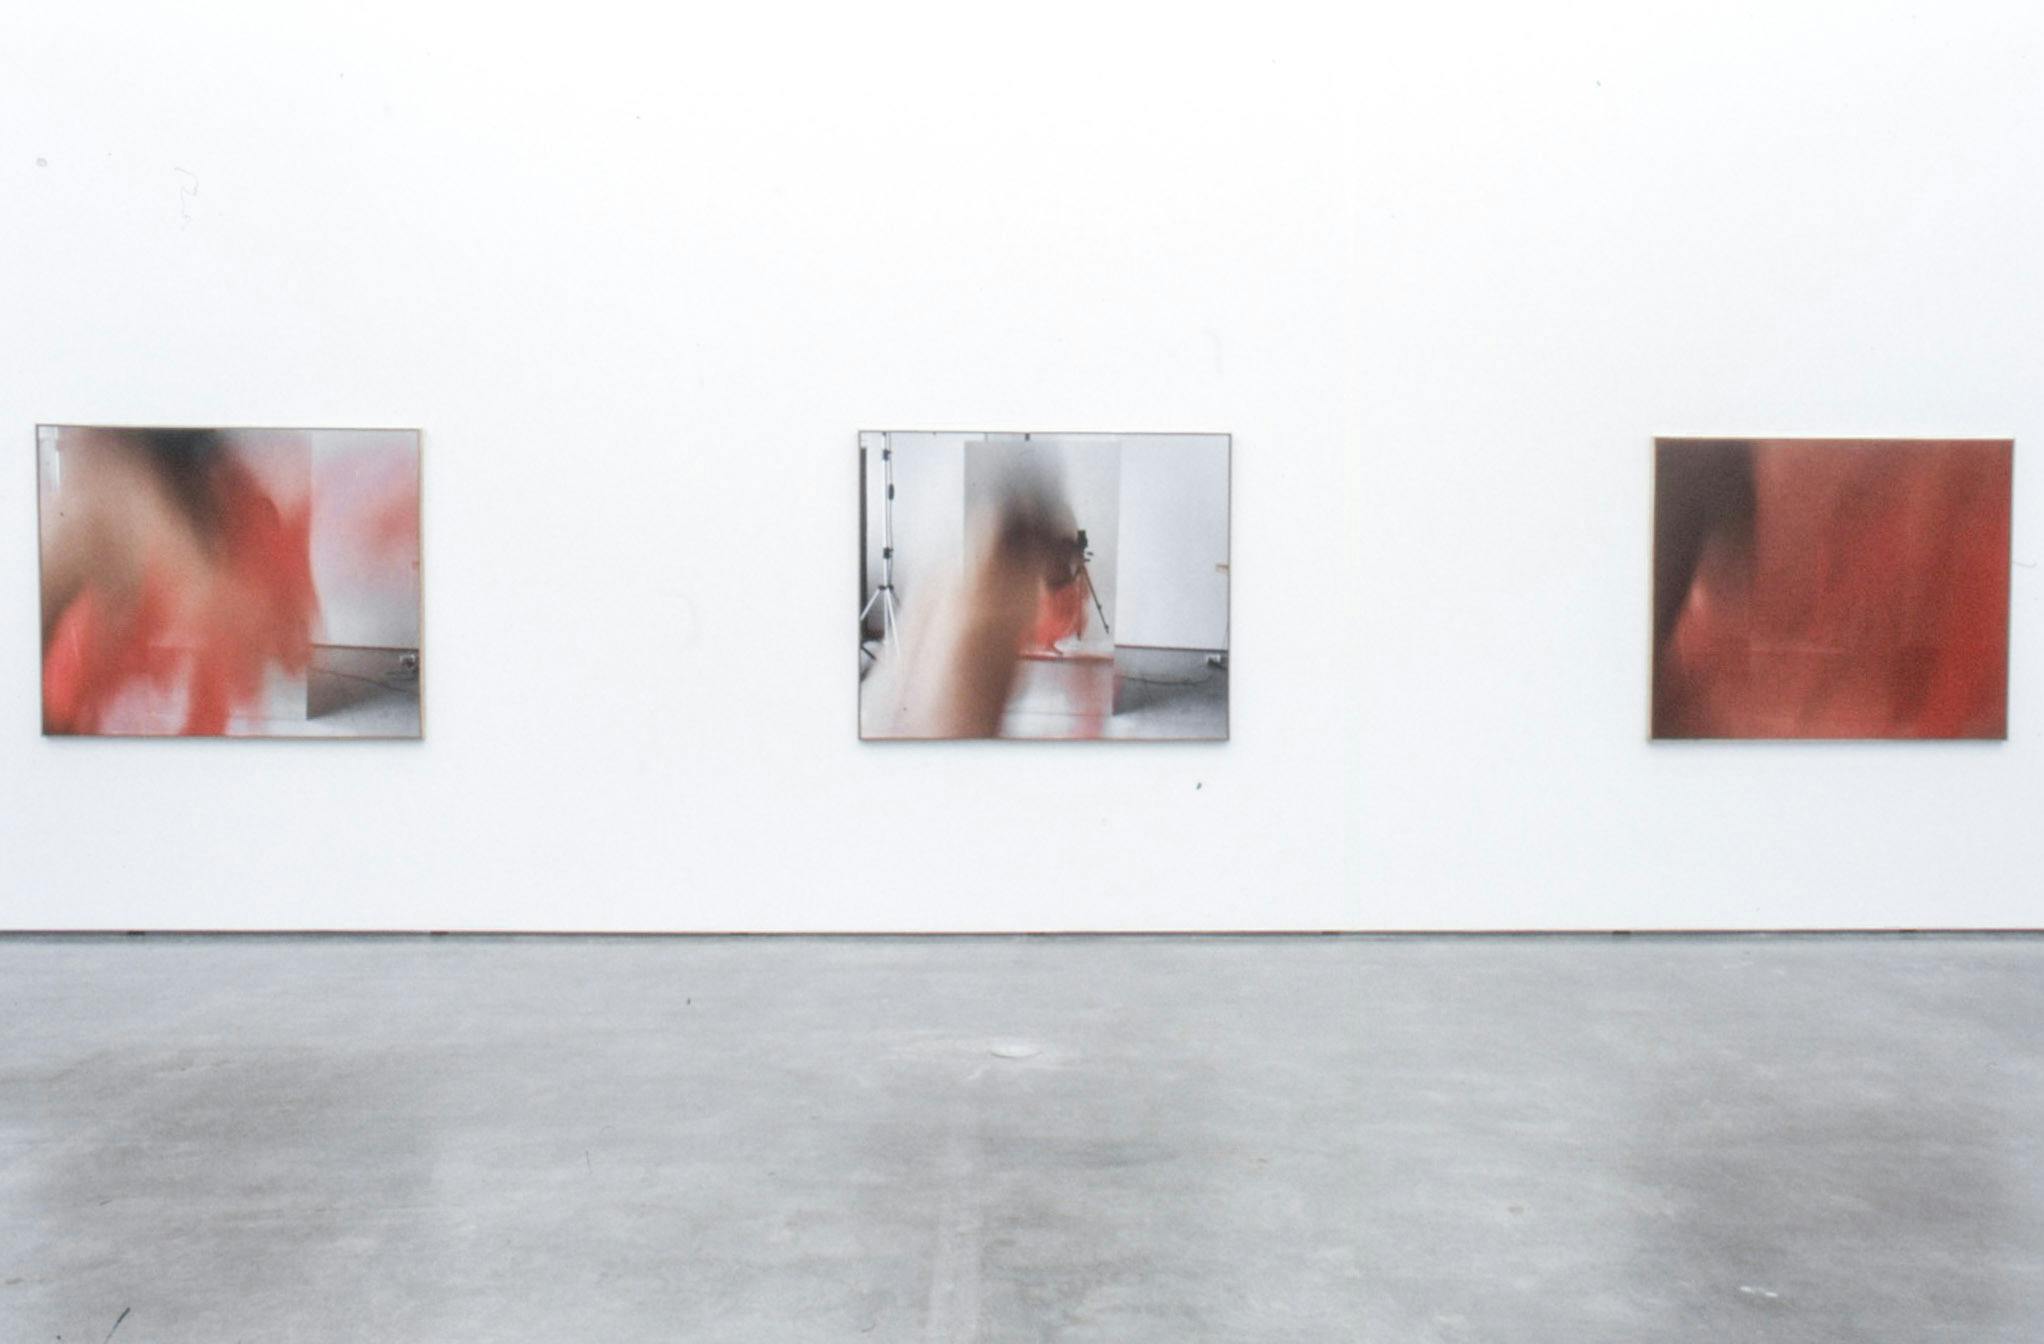 Large-sized photographs are installed on the gallery walls. Three photographs visible in this image all show blurred images of a person dancing with a piece of red-coloured fabric. 